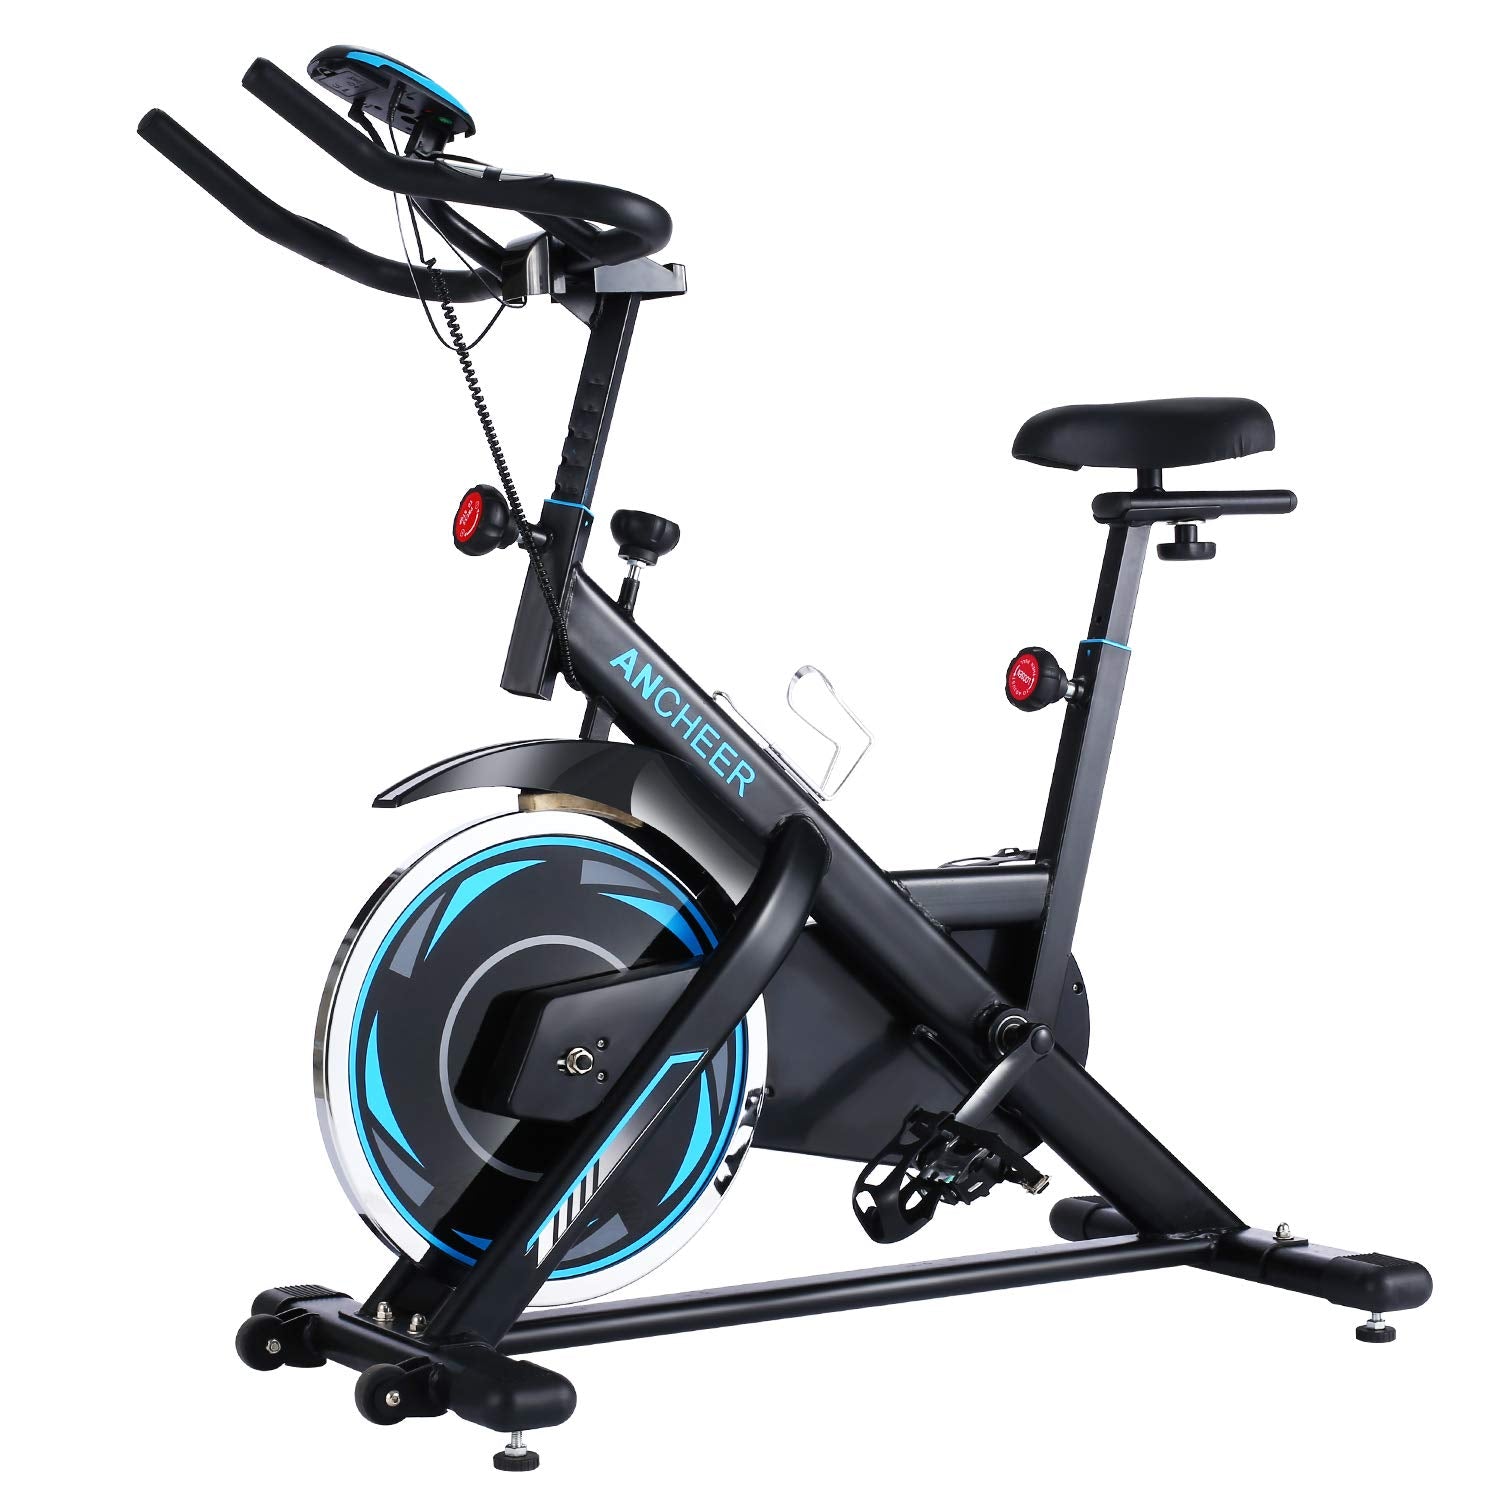 ANCHEER Exercise Bike, Indoor Cycling Bike with Seat Cushion, Holder and LCD Monitor for Home